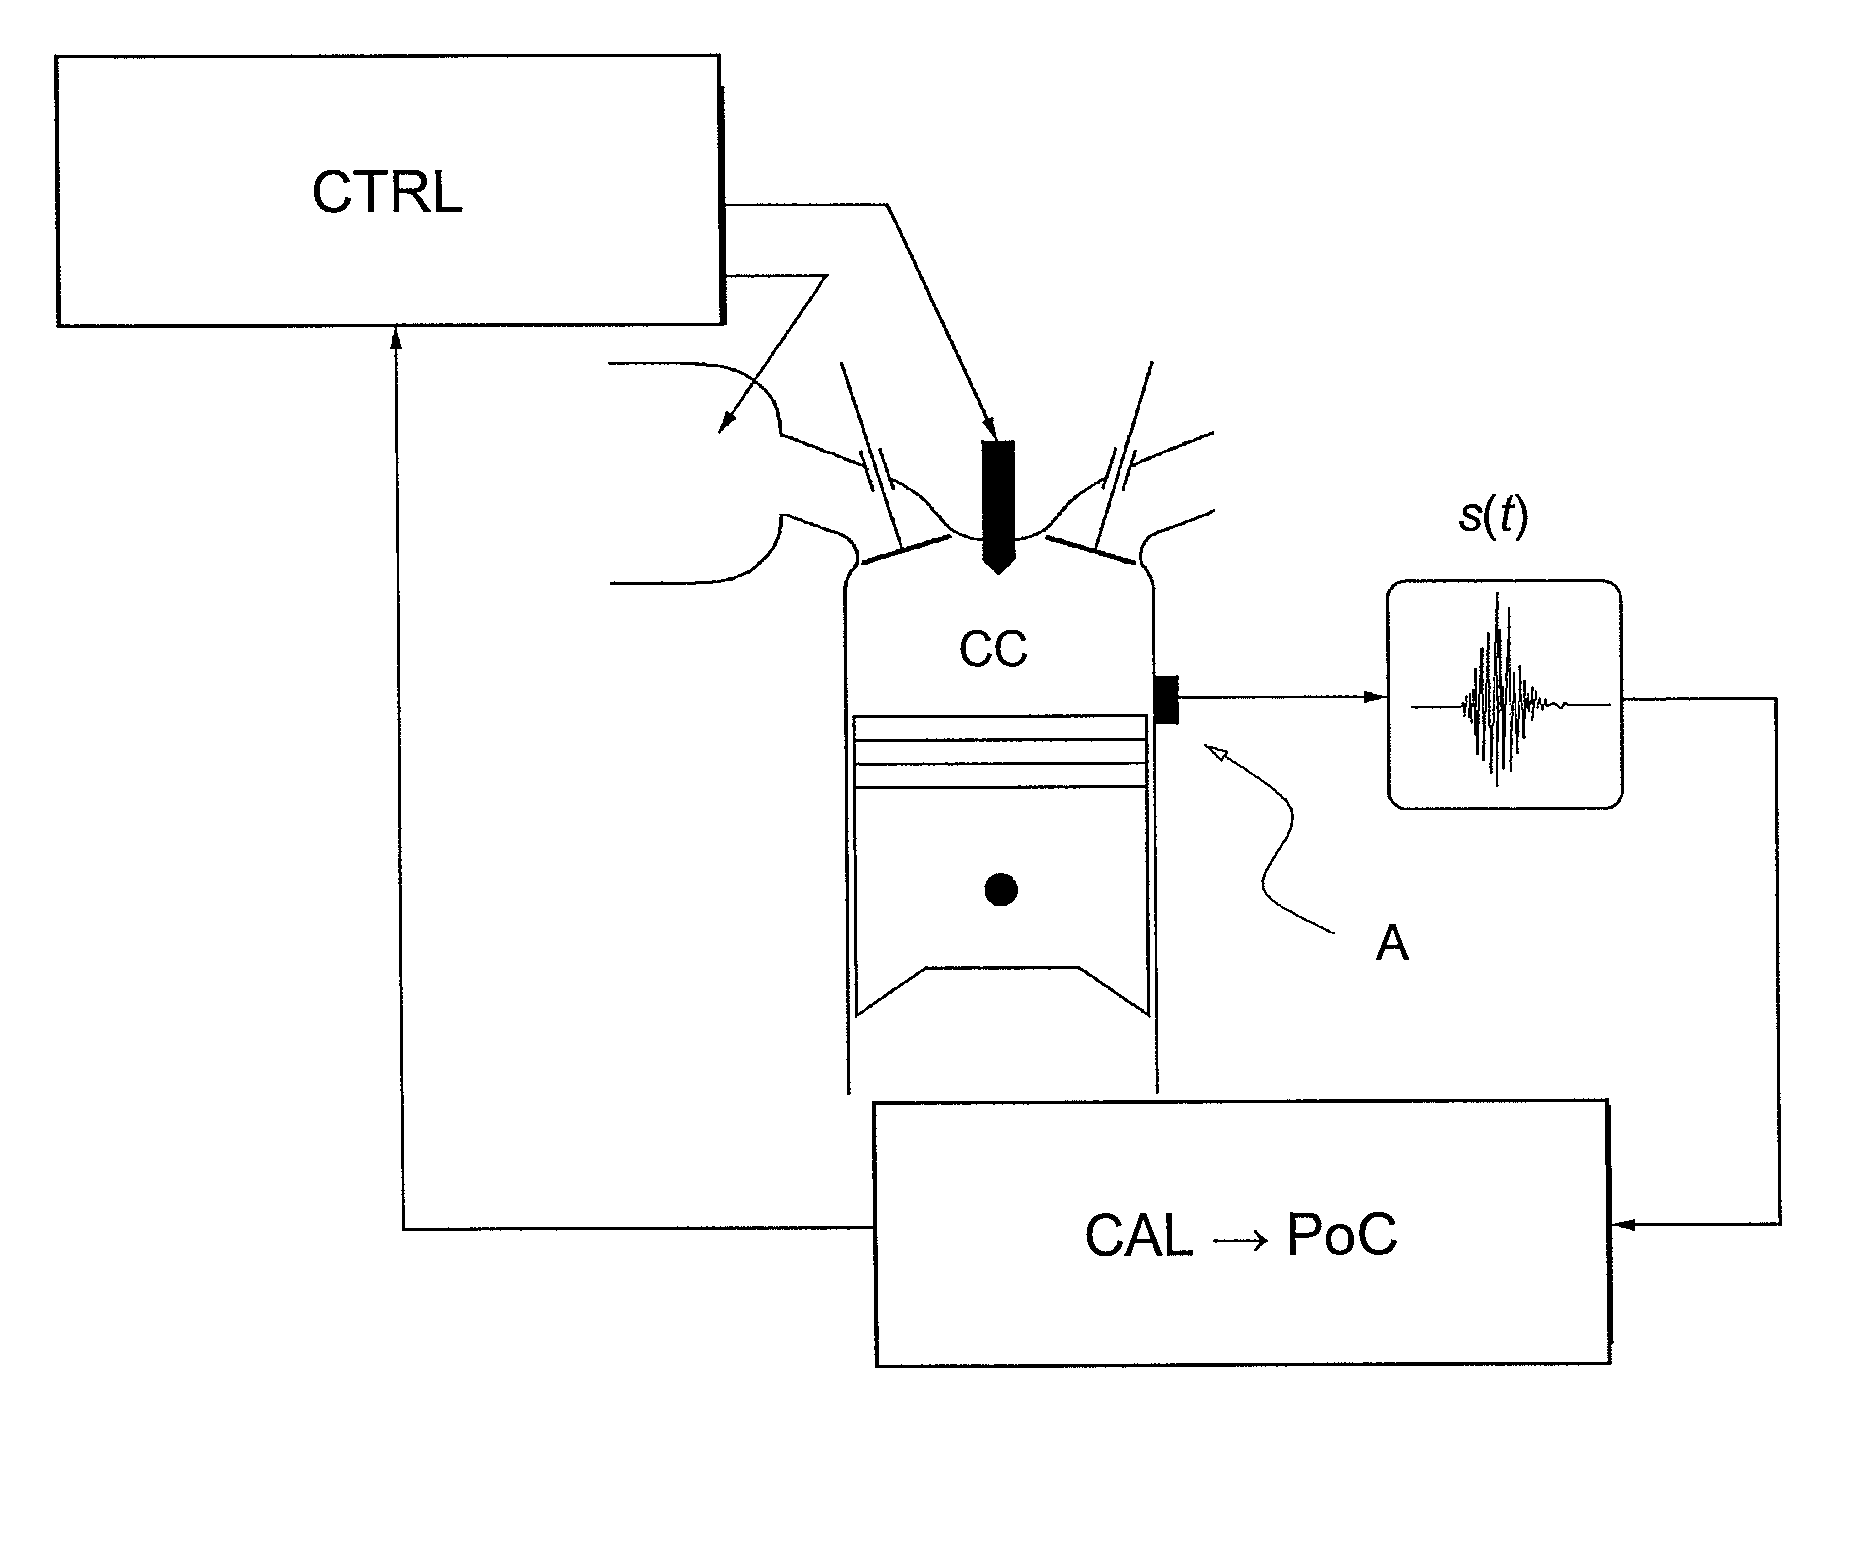 Method for real-time estimation of engine combustion parameters from vibratory signals